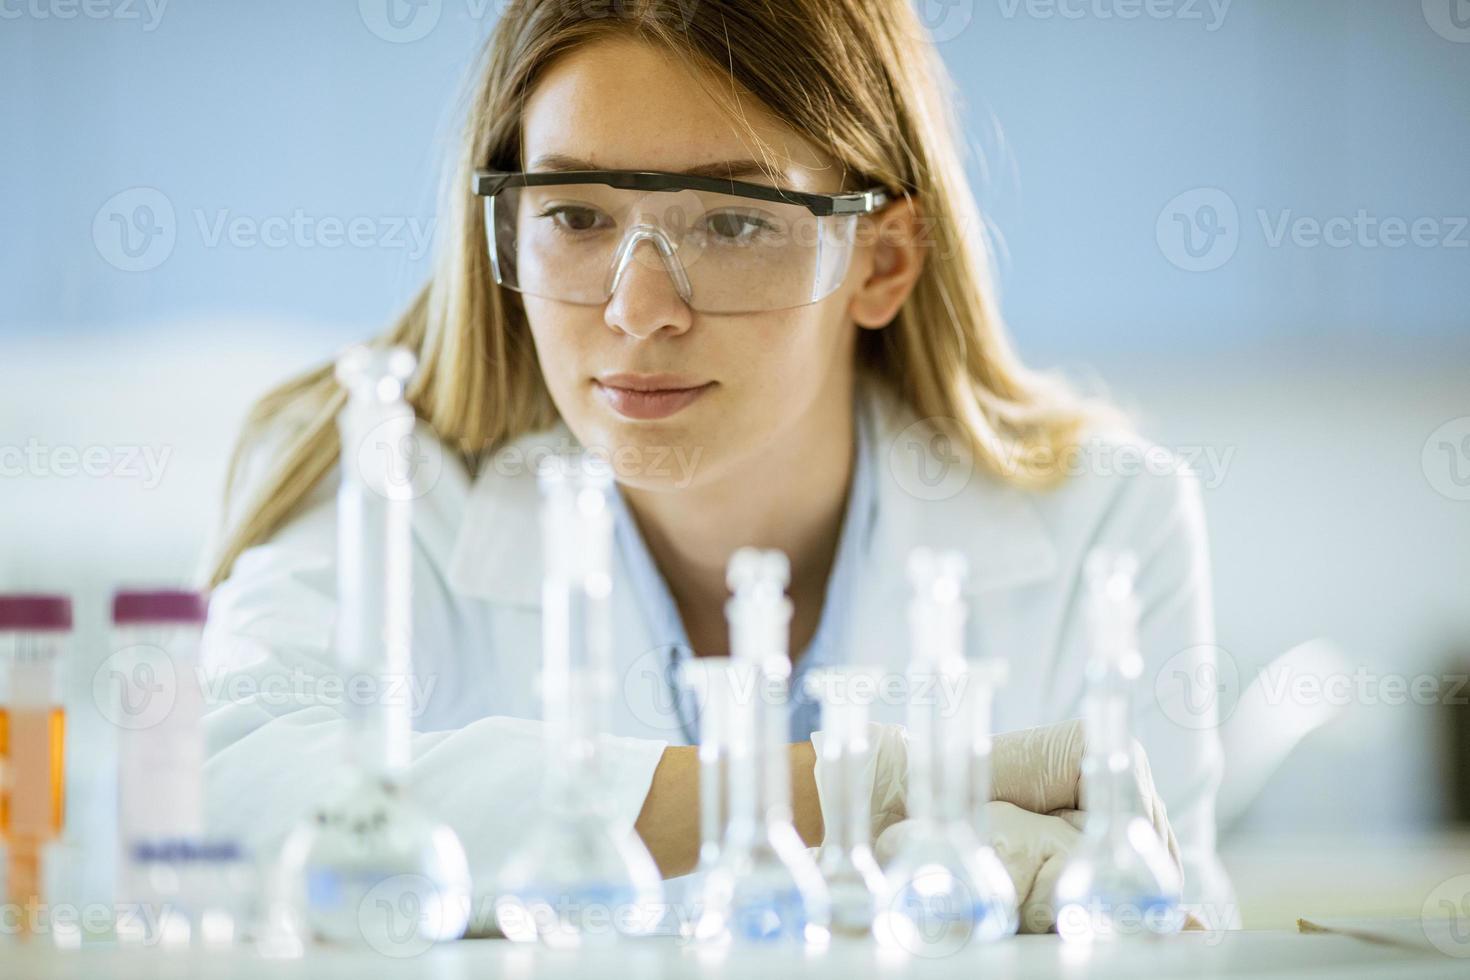 Female medical or scientific researcher looking at a flasks with solutions in a laboratory photo